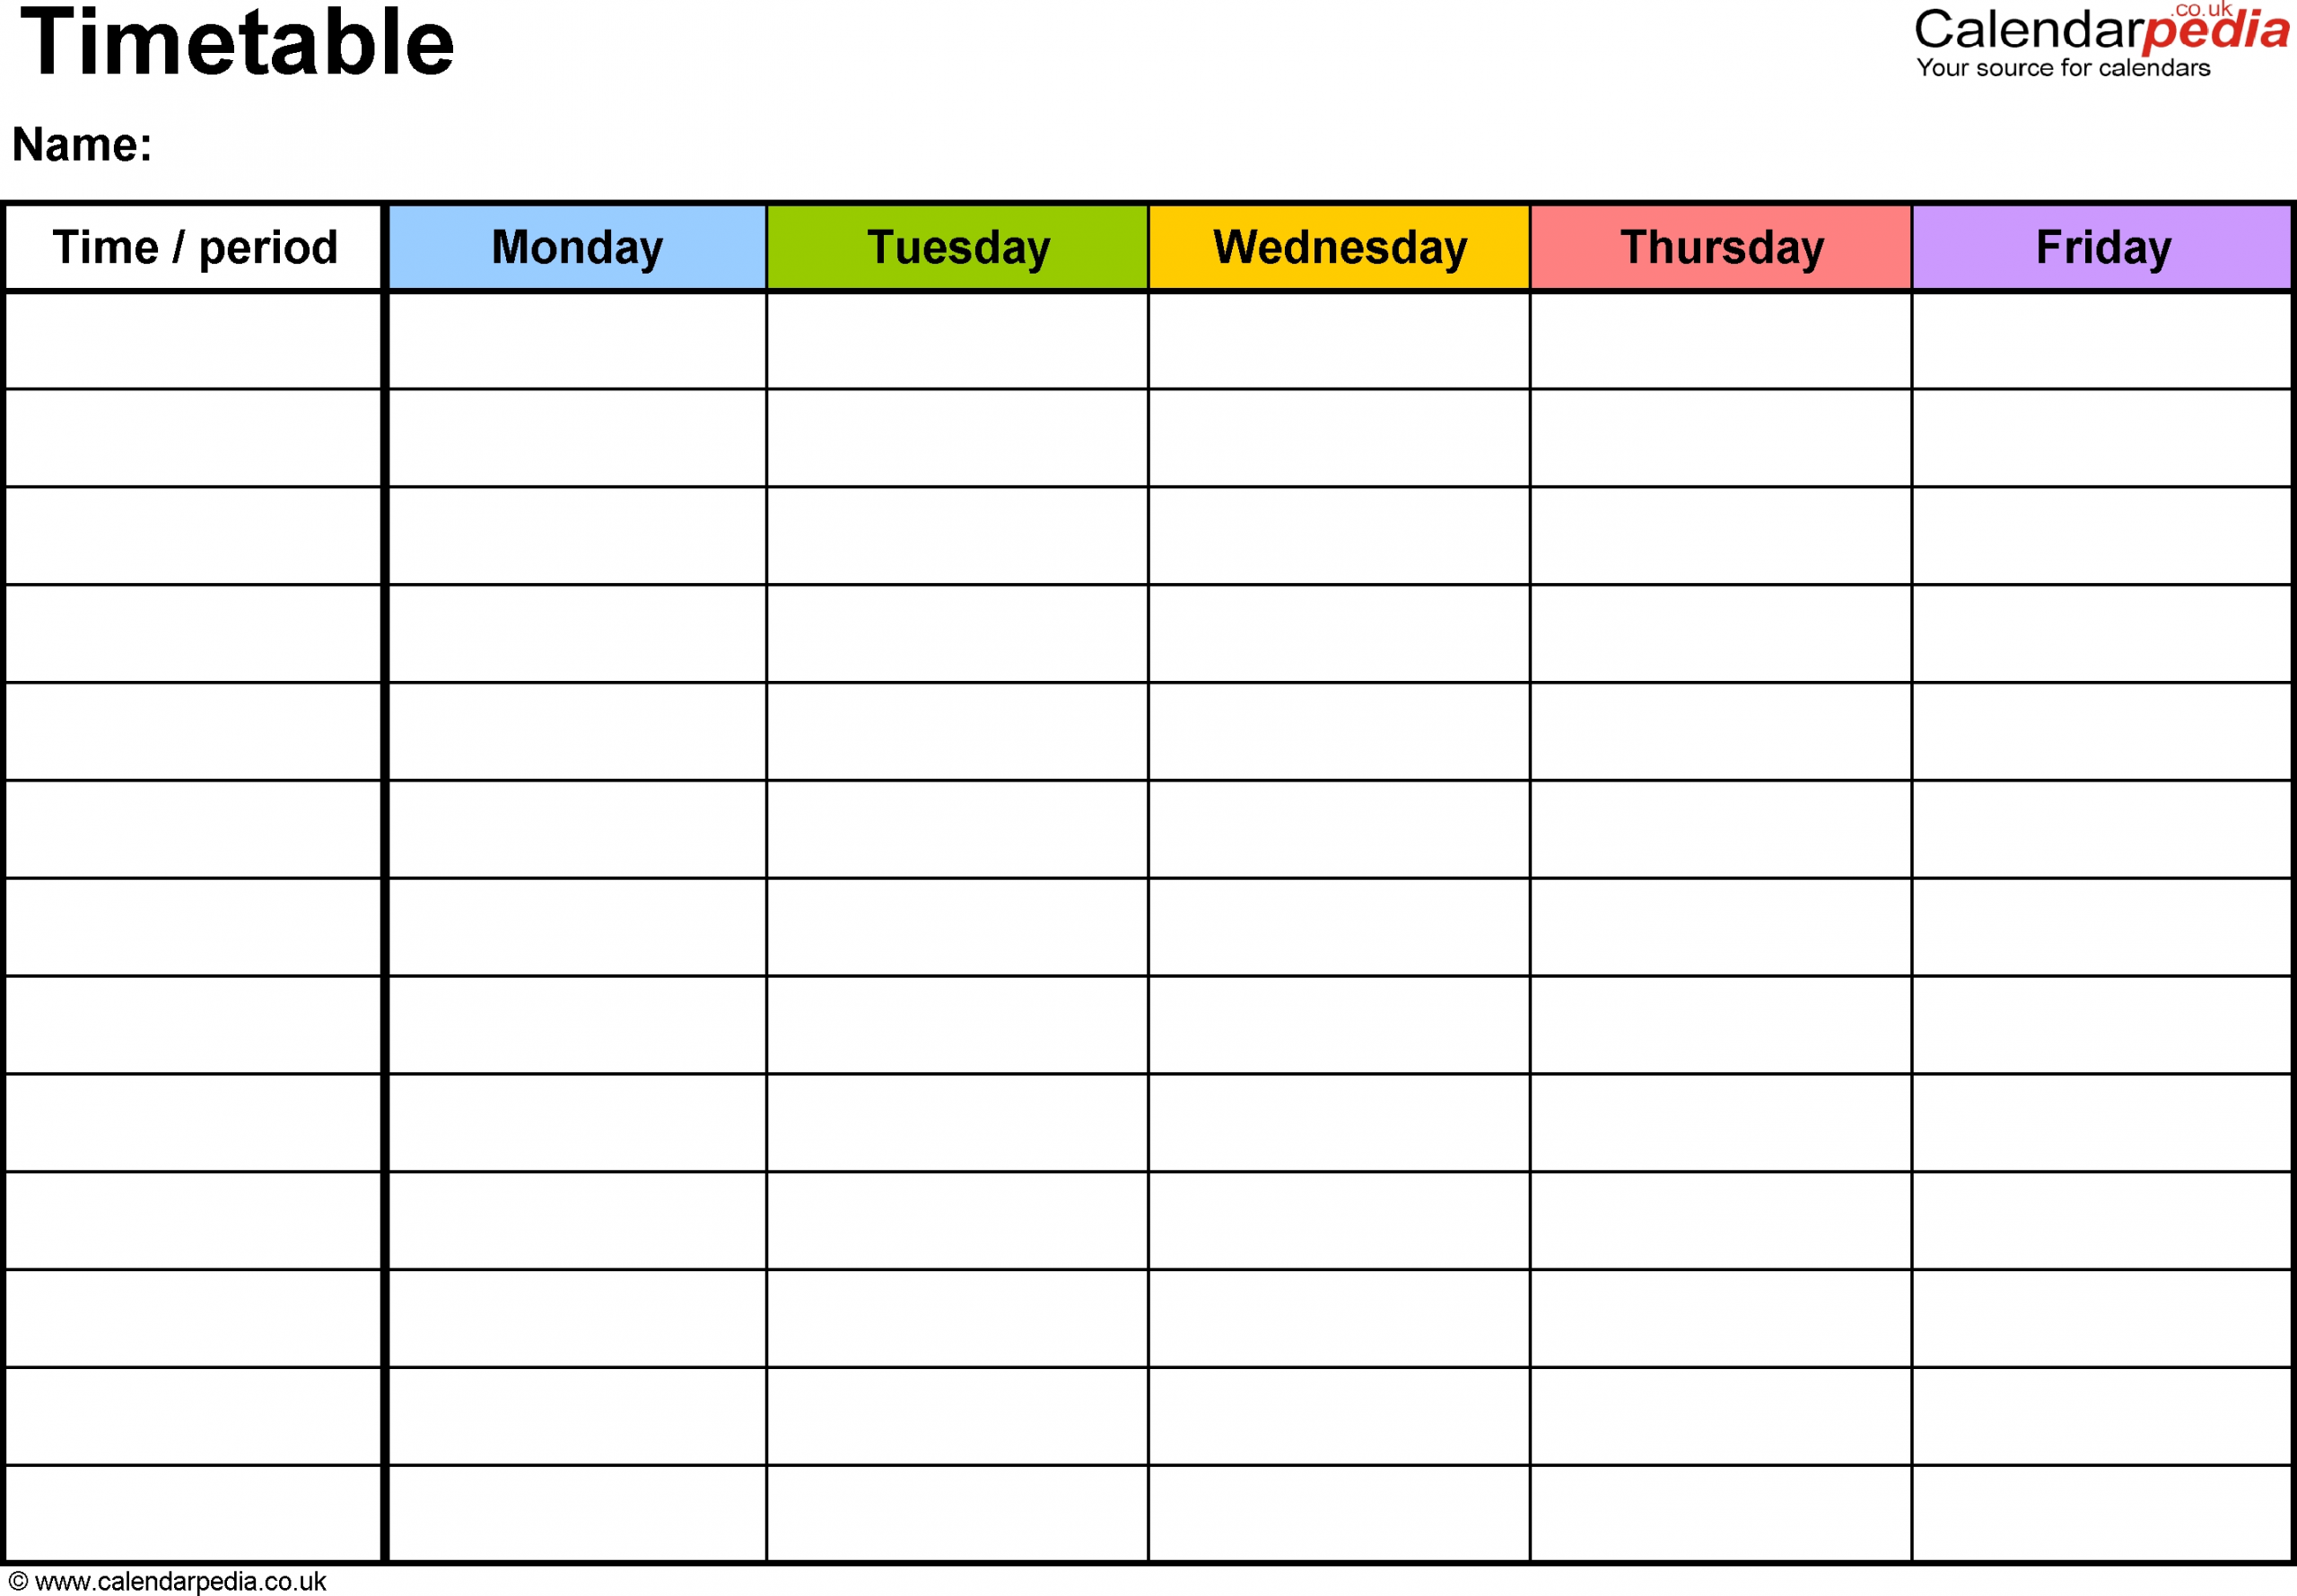 Pdf Timetable Template 2: Landscape Format, A4, 1 Page, Monday To with Free Printable 5 Day Calendar Pages